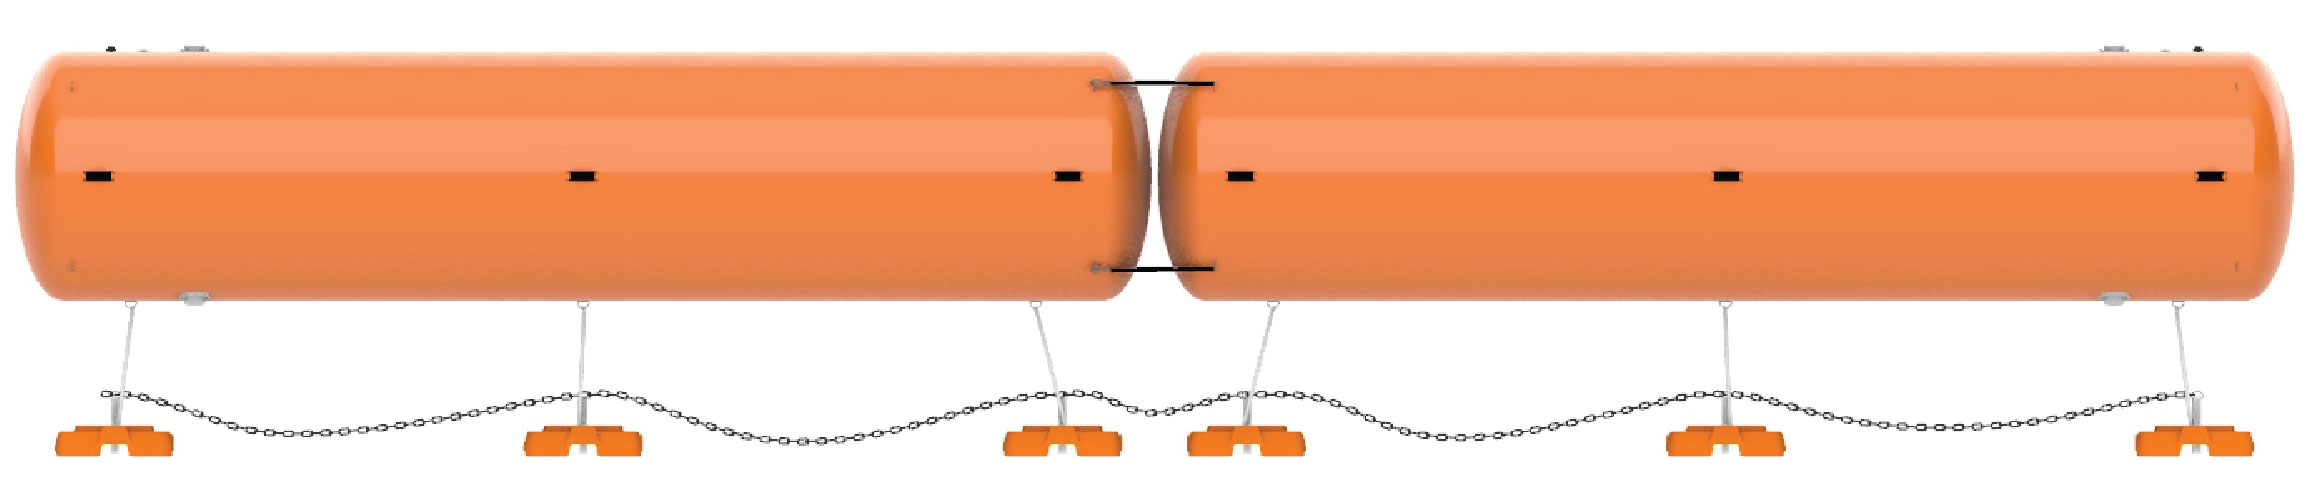 Inflatable Aquatic Safety Barrier